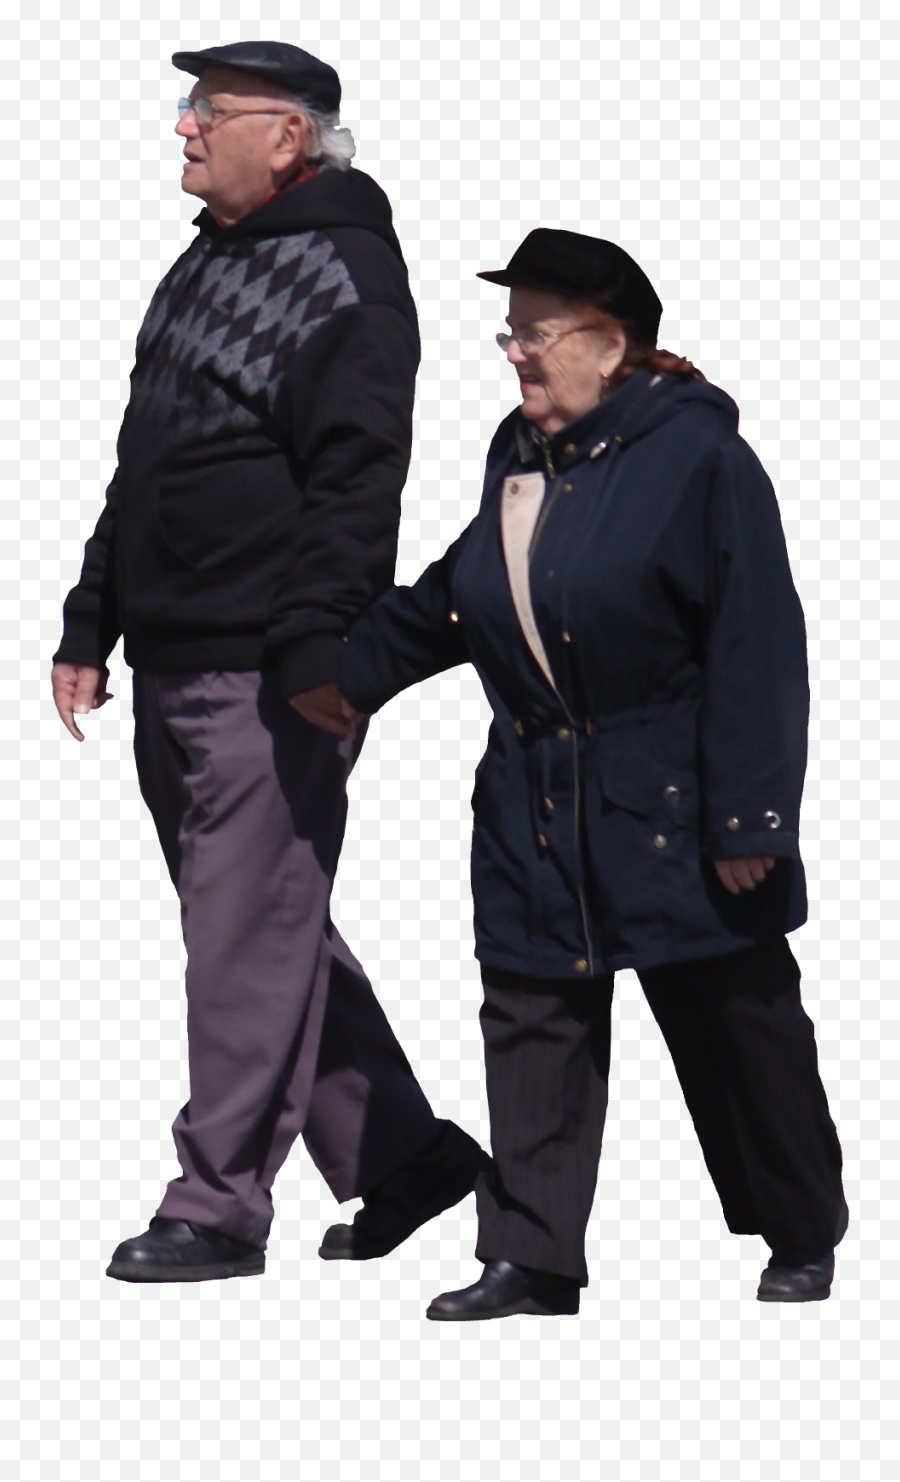 Old Person Png 2 Image - Old People Walking Png,Old Person Png - free ...